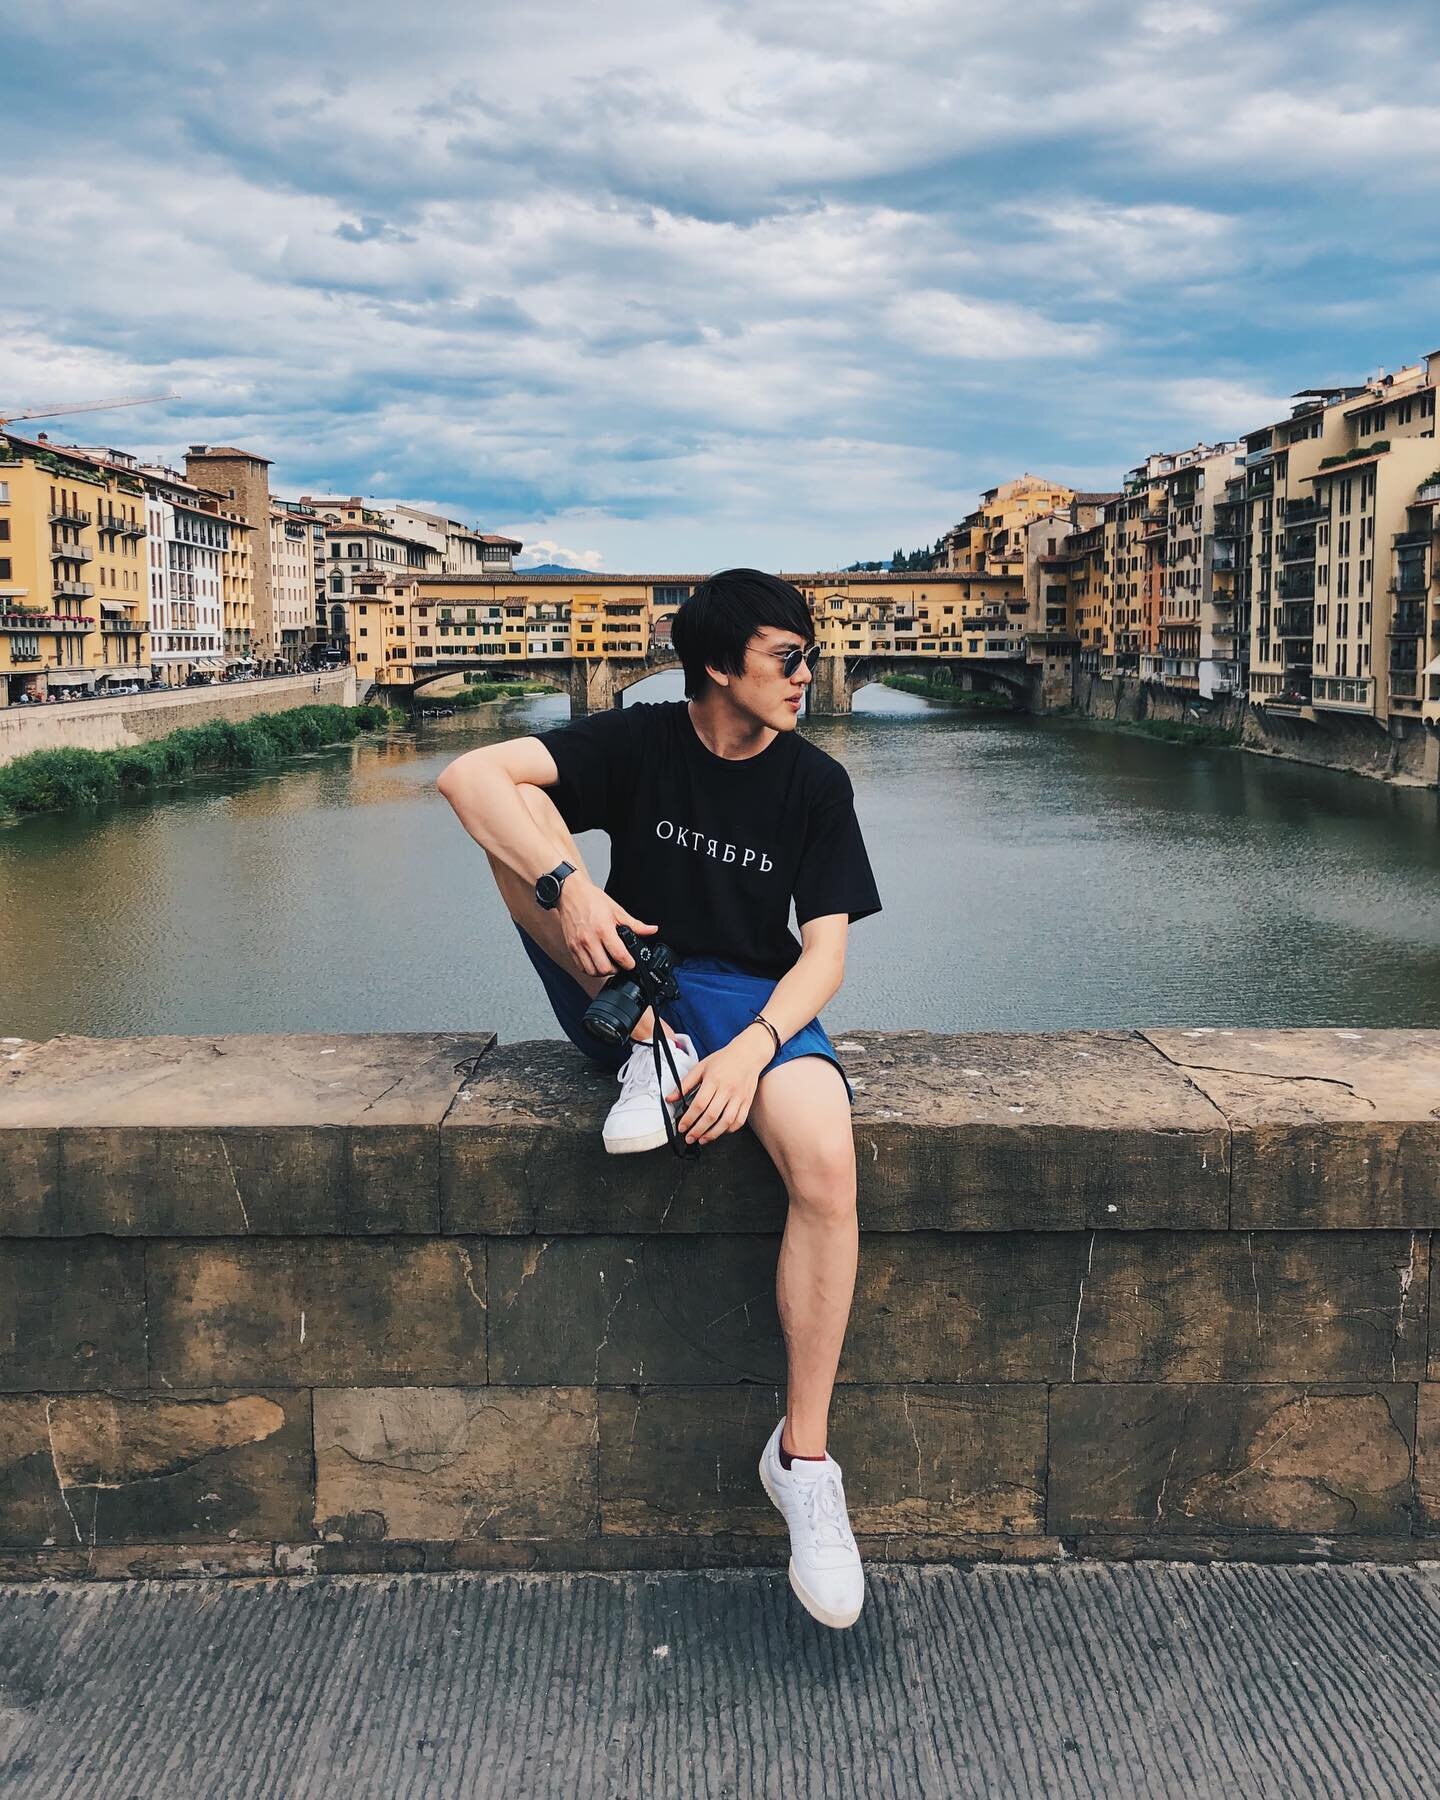 People tell me I put too much Parmesan cheese in my pasta. I don&rsquo;t need that kind of negativity in my life. 🍝
#PonteVecchio
#ArnoRiver
#FlorenceItaly
#SonyARII
#momentsofmine
#backpackingstory
#beautifuldestinations